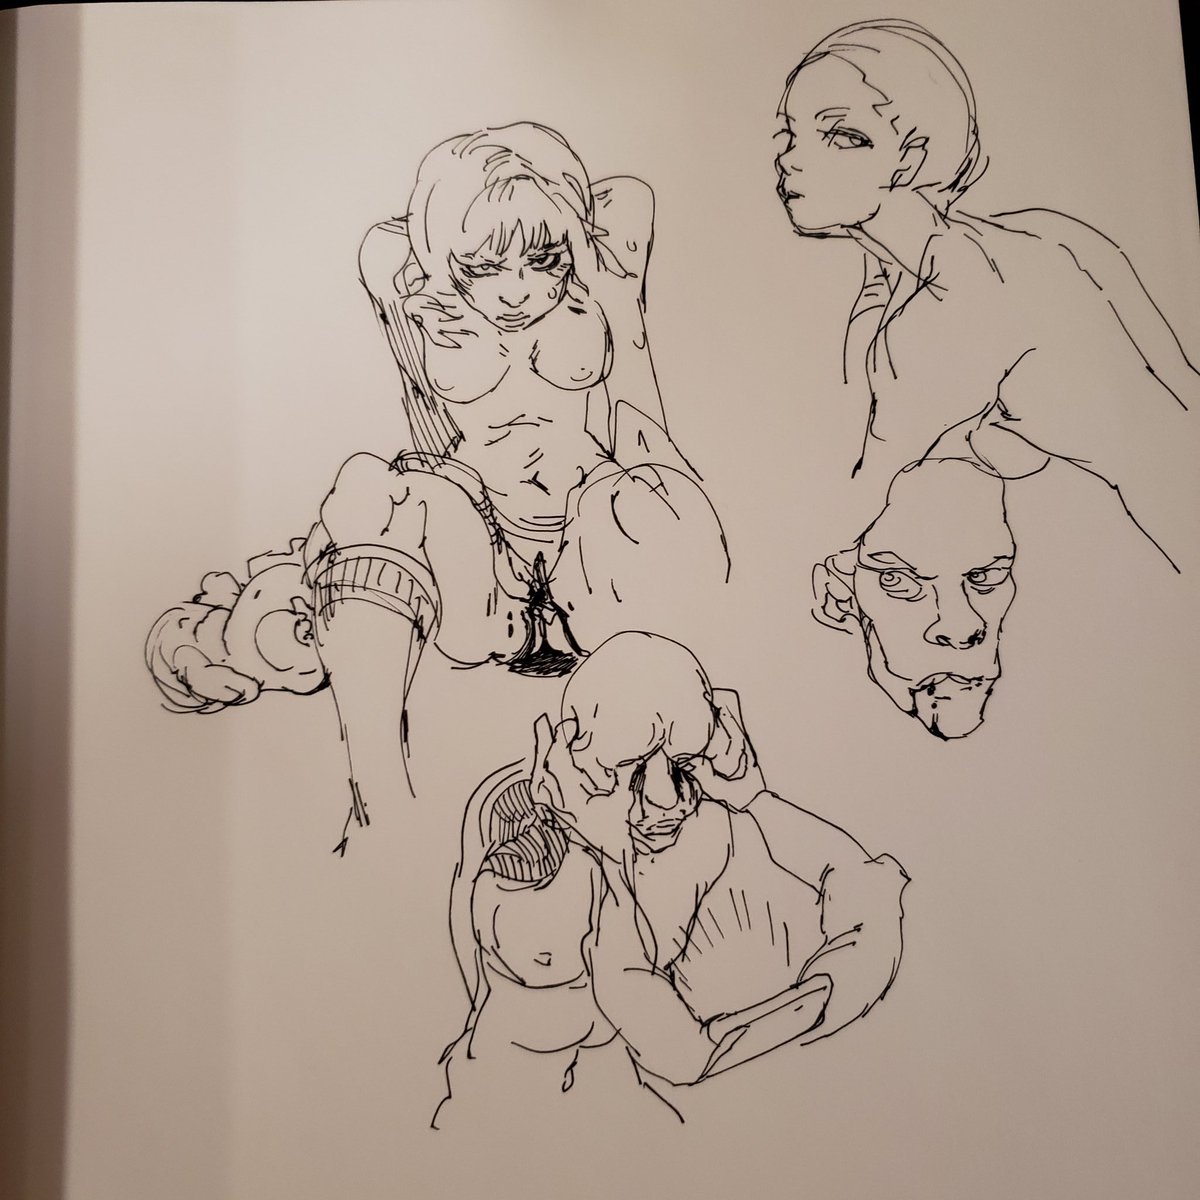 Some ink sketches from earlier 